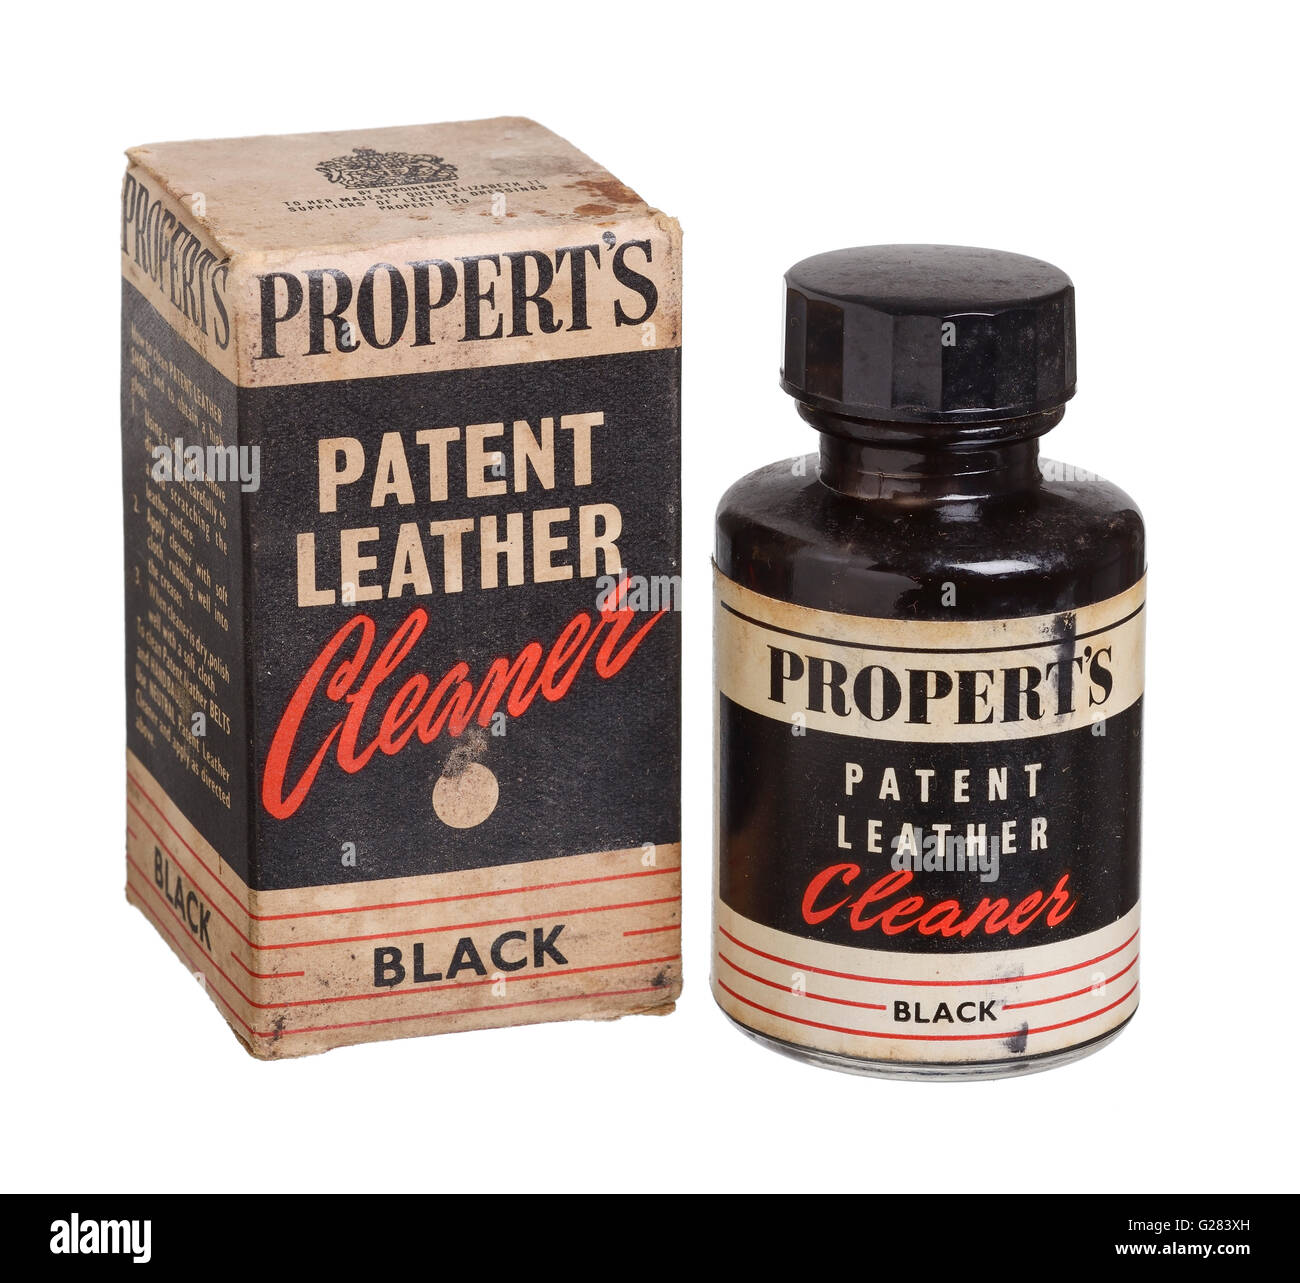 Old vintage bottle and box of Proberts Patent Leather Cleaner Stock Photo